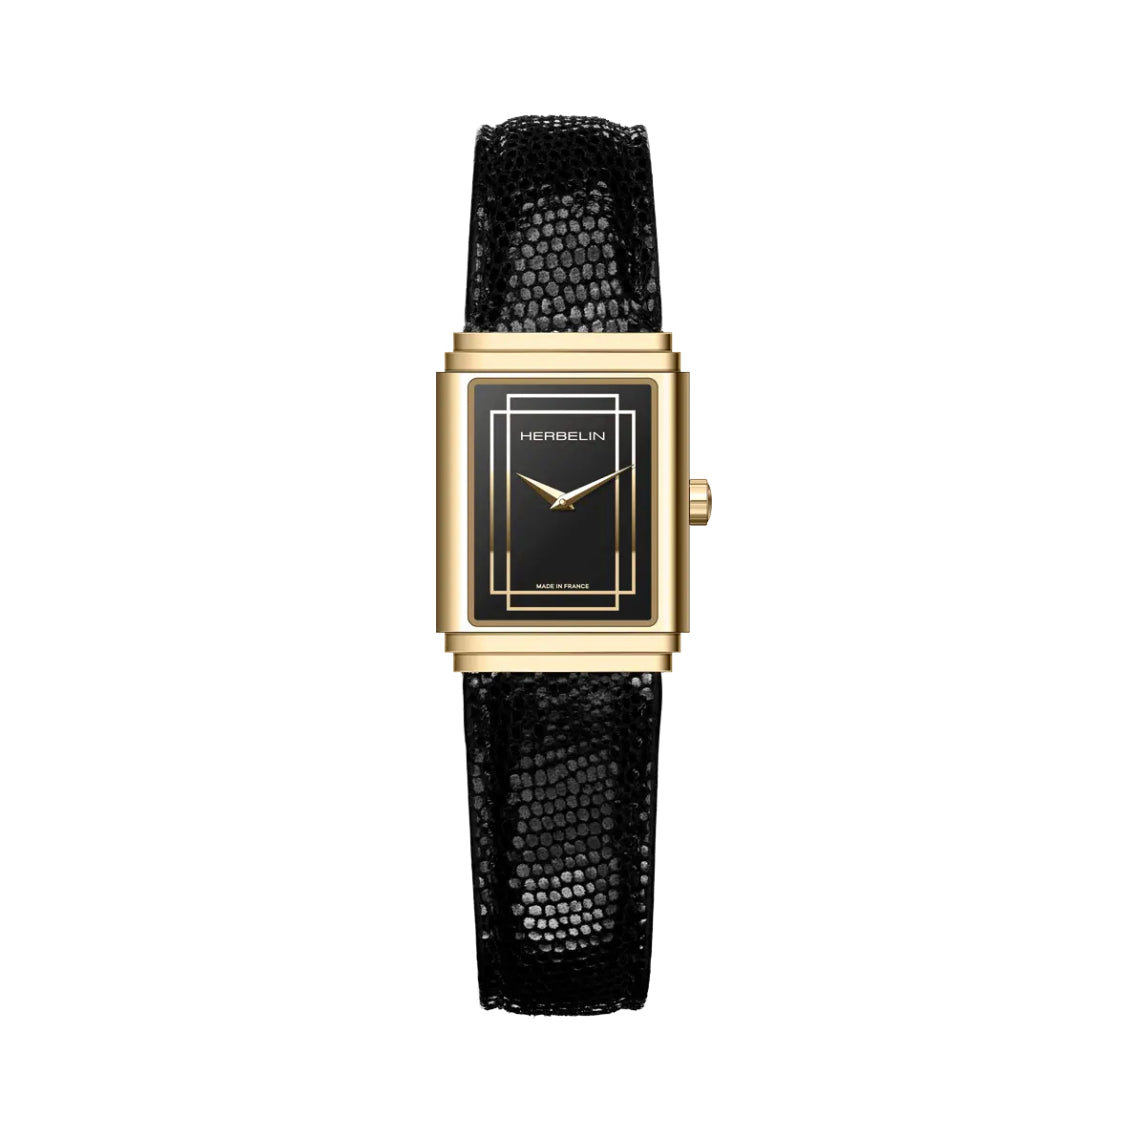 Herbelin Art Deco 1925’s Ladies Steel Gold Watch with Black Dial & Leather Strap